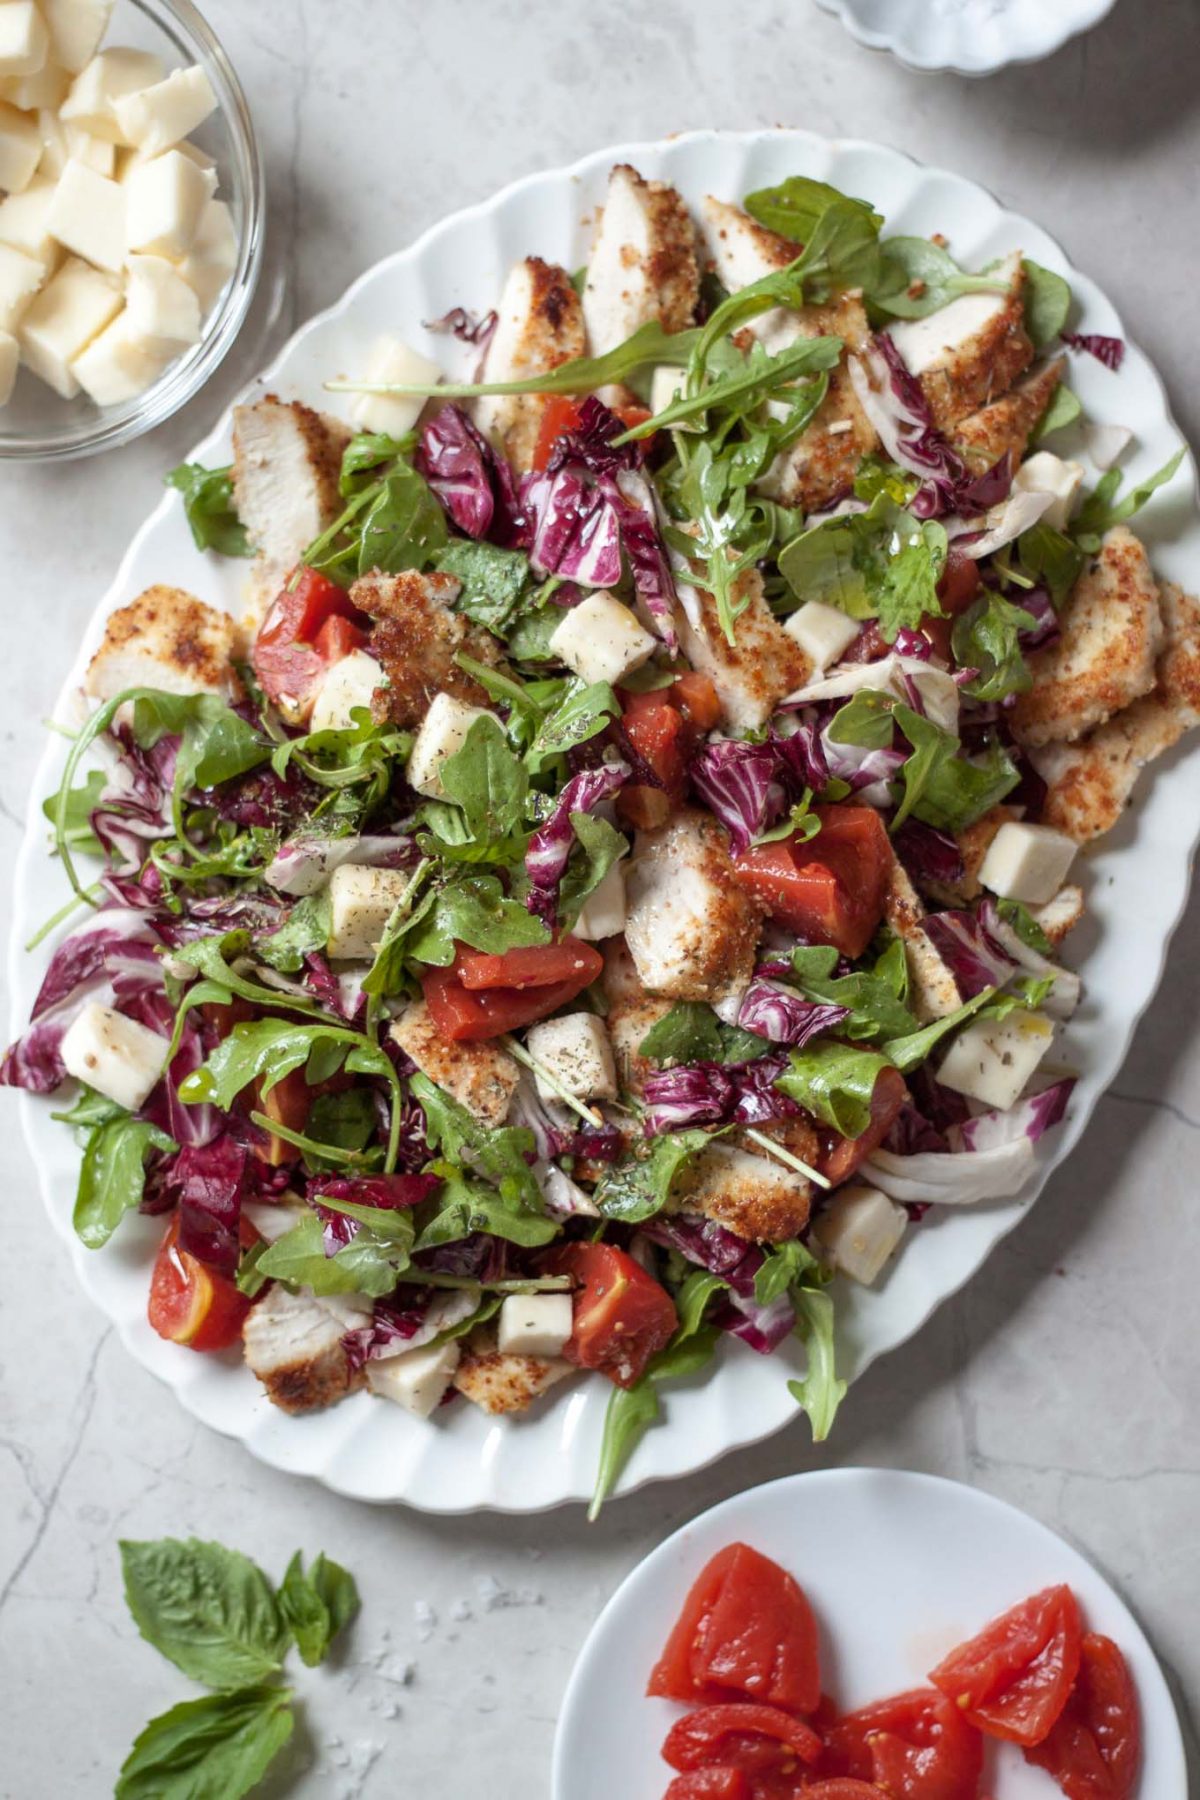 Parmesan Crusted Chicken Caprese Salad Recipe - A spruced up caprese salad made with arugula, radicchio, mozzarella, tomatoes, and crispy chicken cutlets breaded with almond meal and Parmesan!